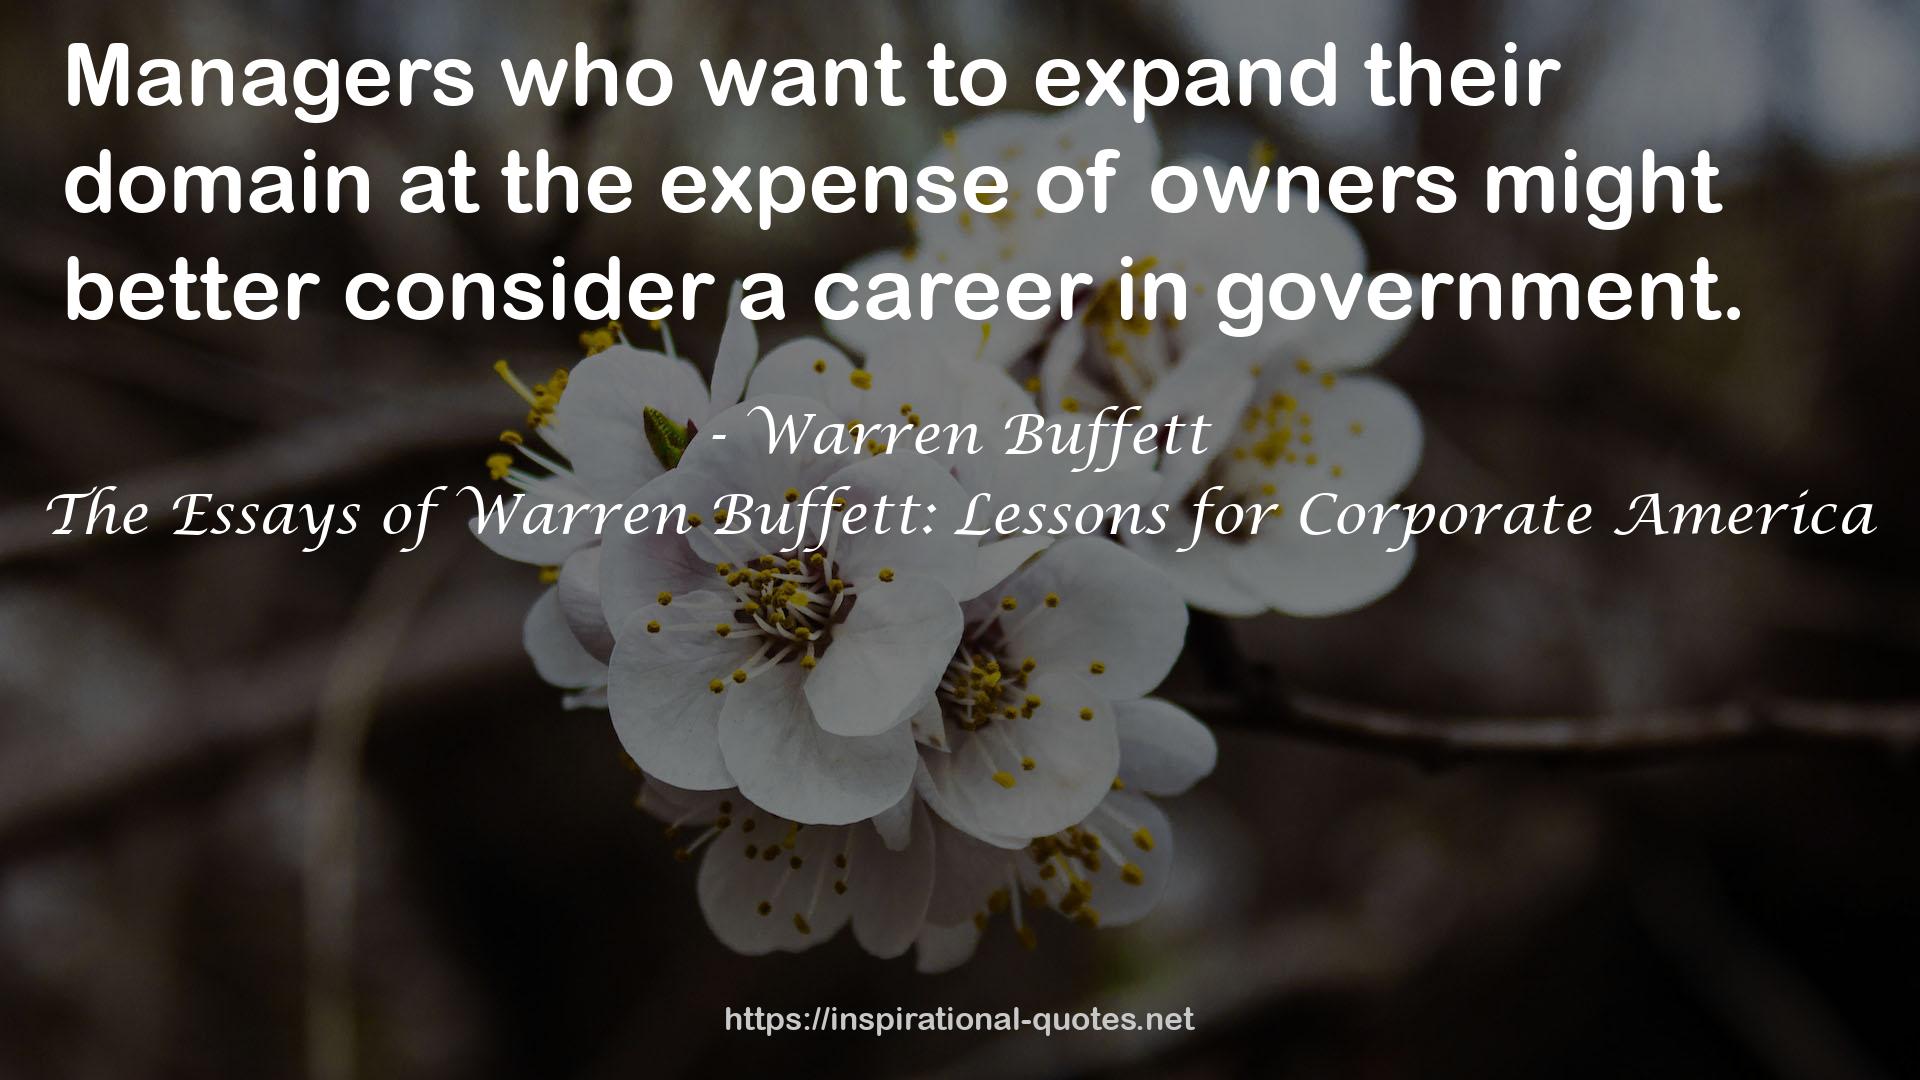 The Essays of Warren Buffett: Lessons for Corporate America QUOTES